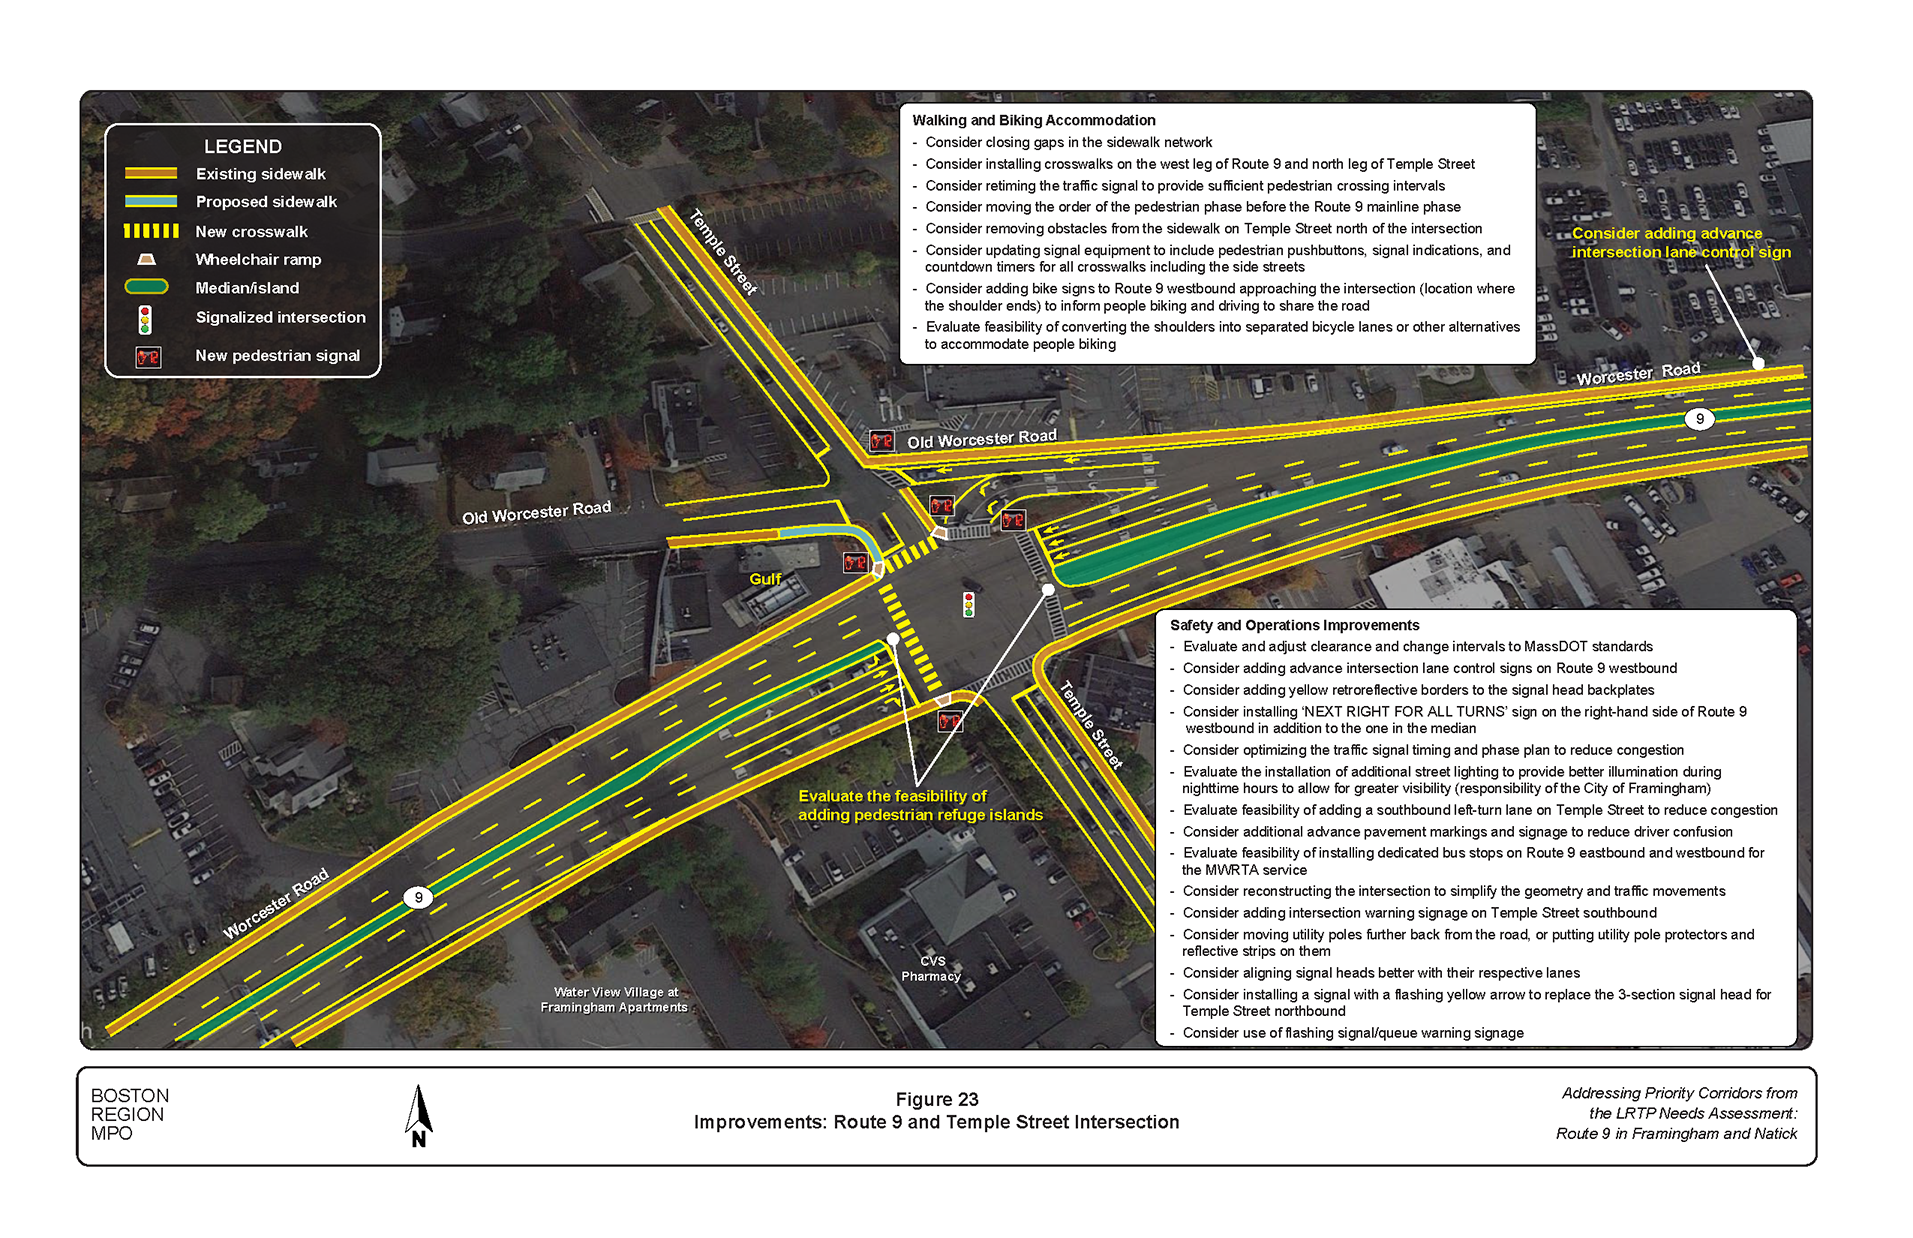 Figure 23 is an aerial photo showing the intersection of Route 9 and Temple Street and the improvements